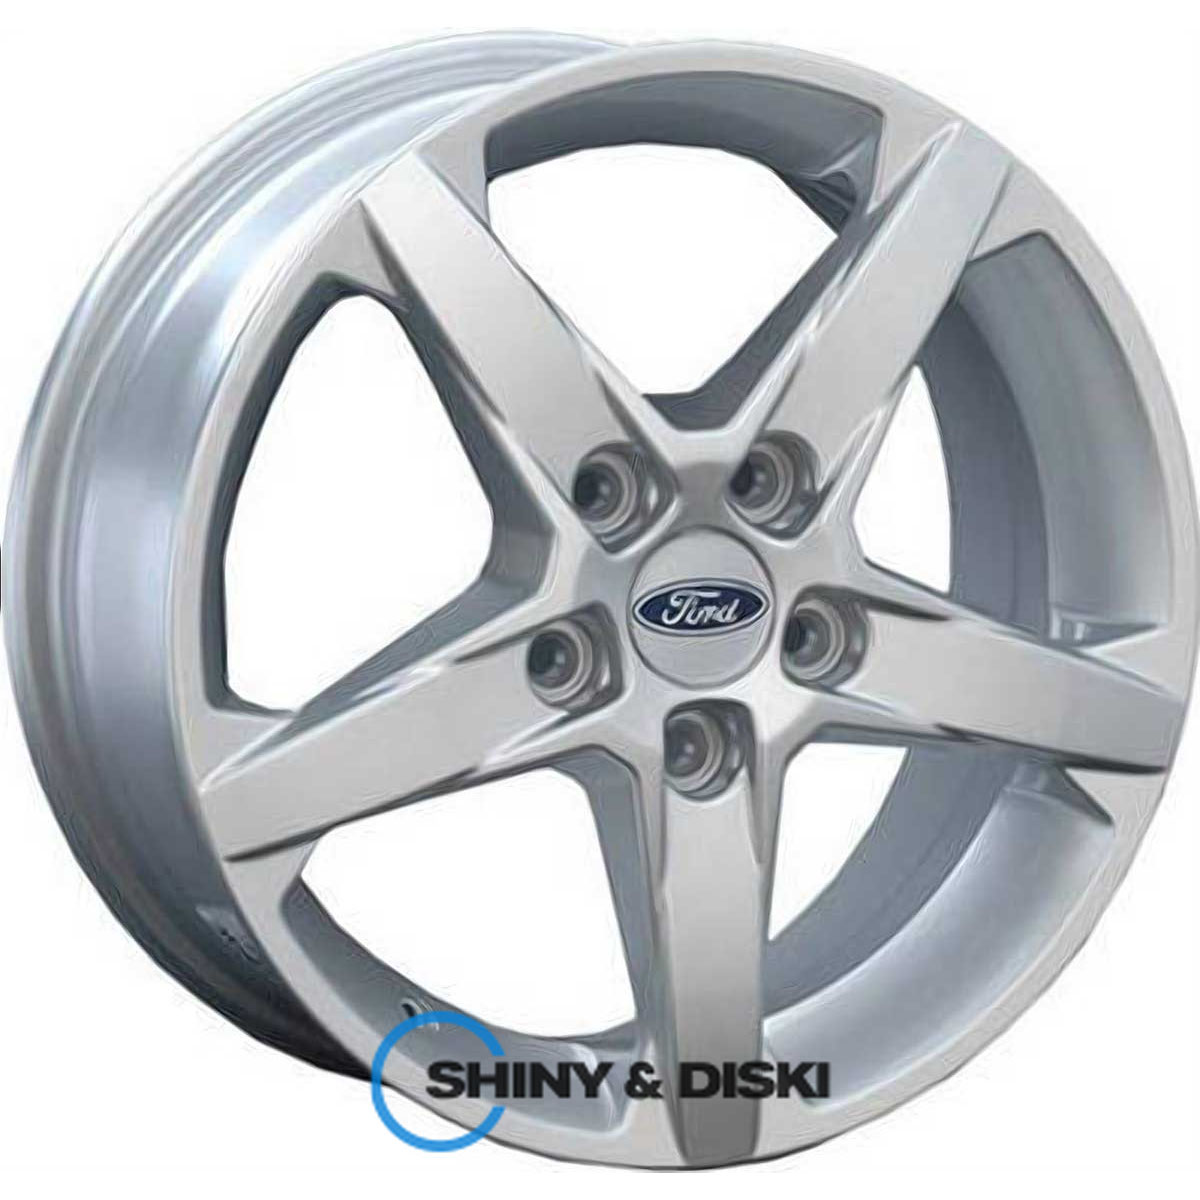 replay ford fd36 s r17 w7 pcd5x108 et50 dia63.3